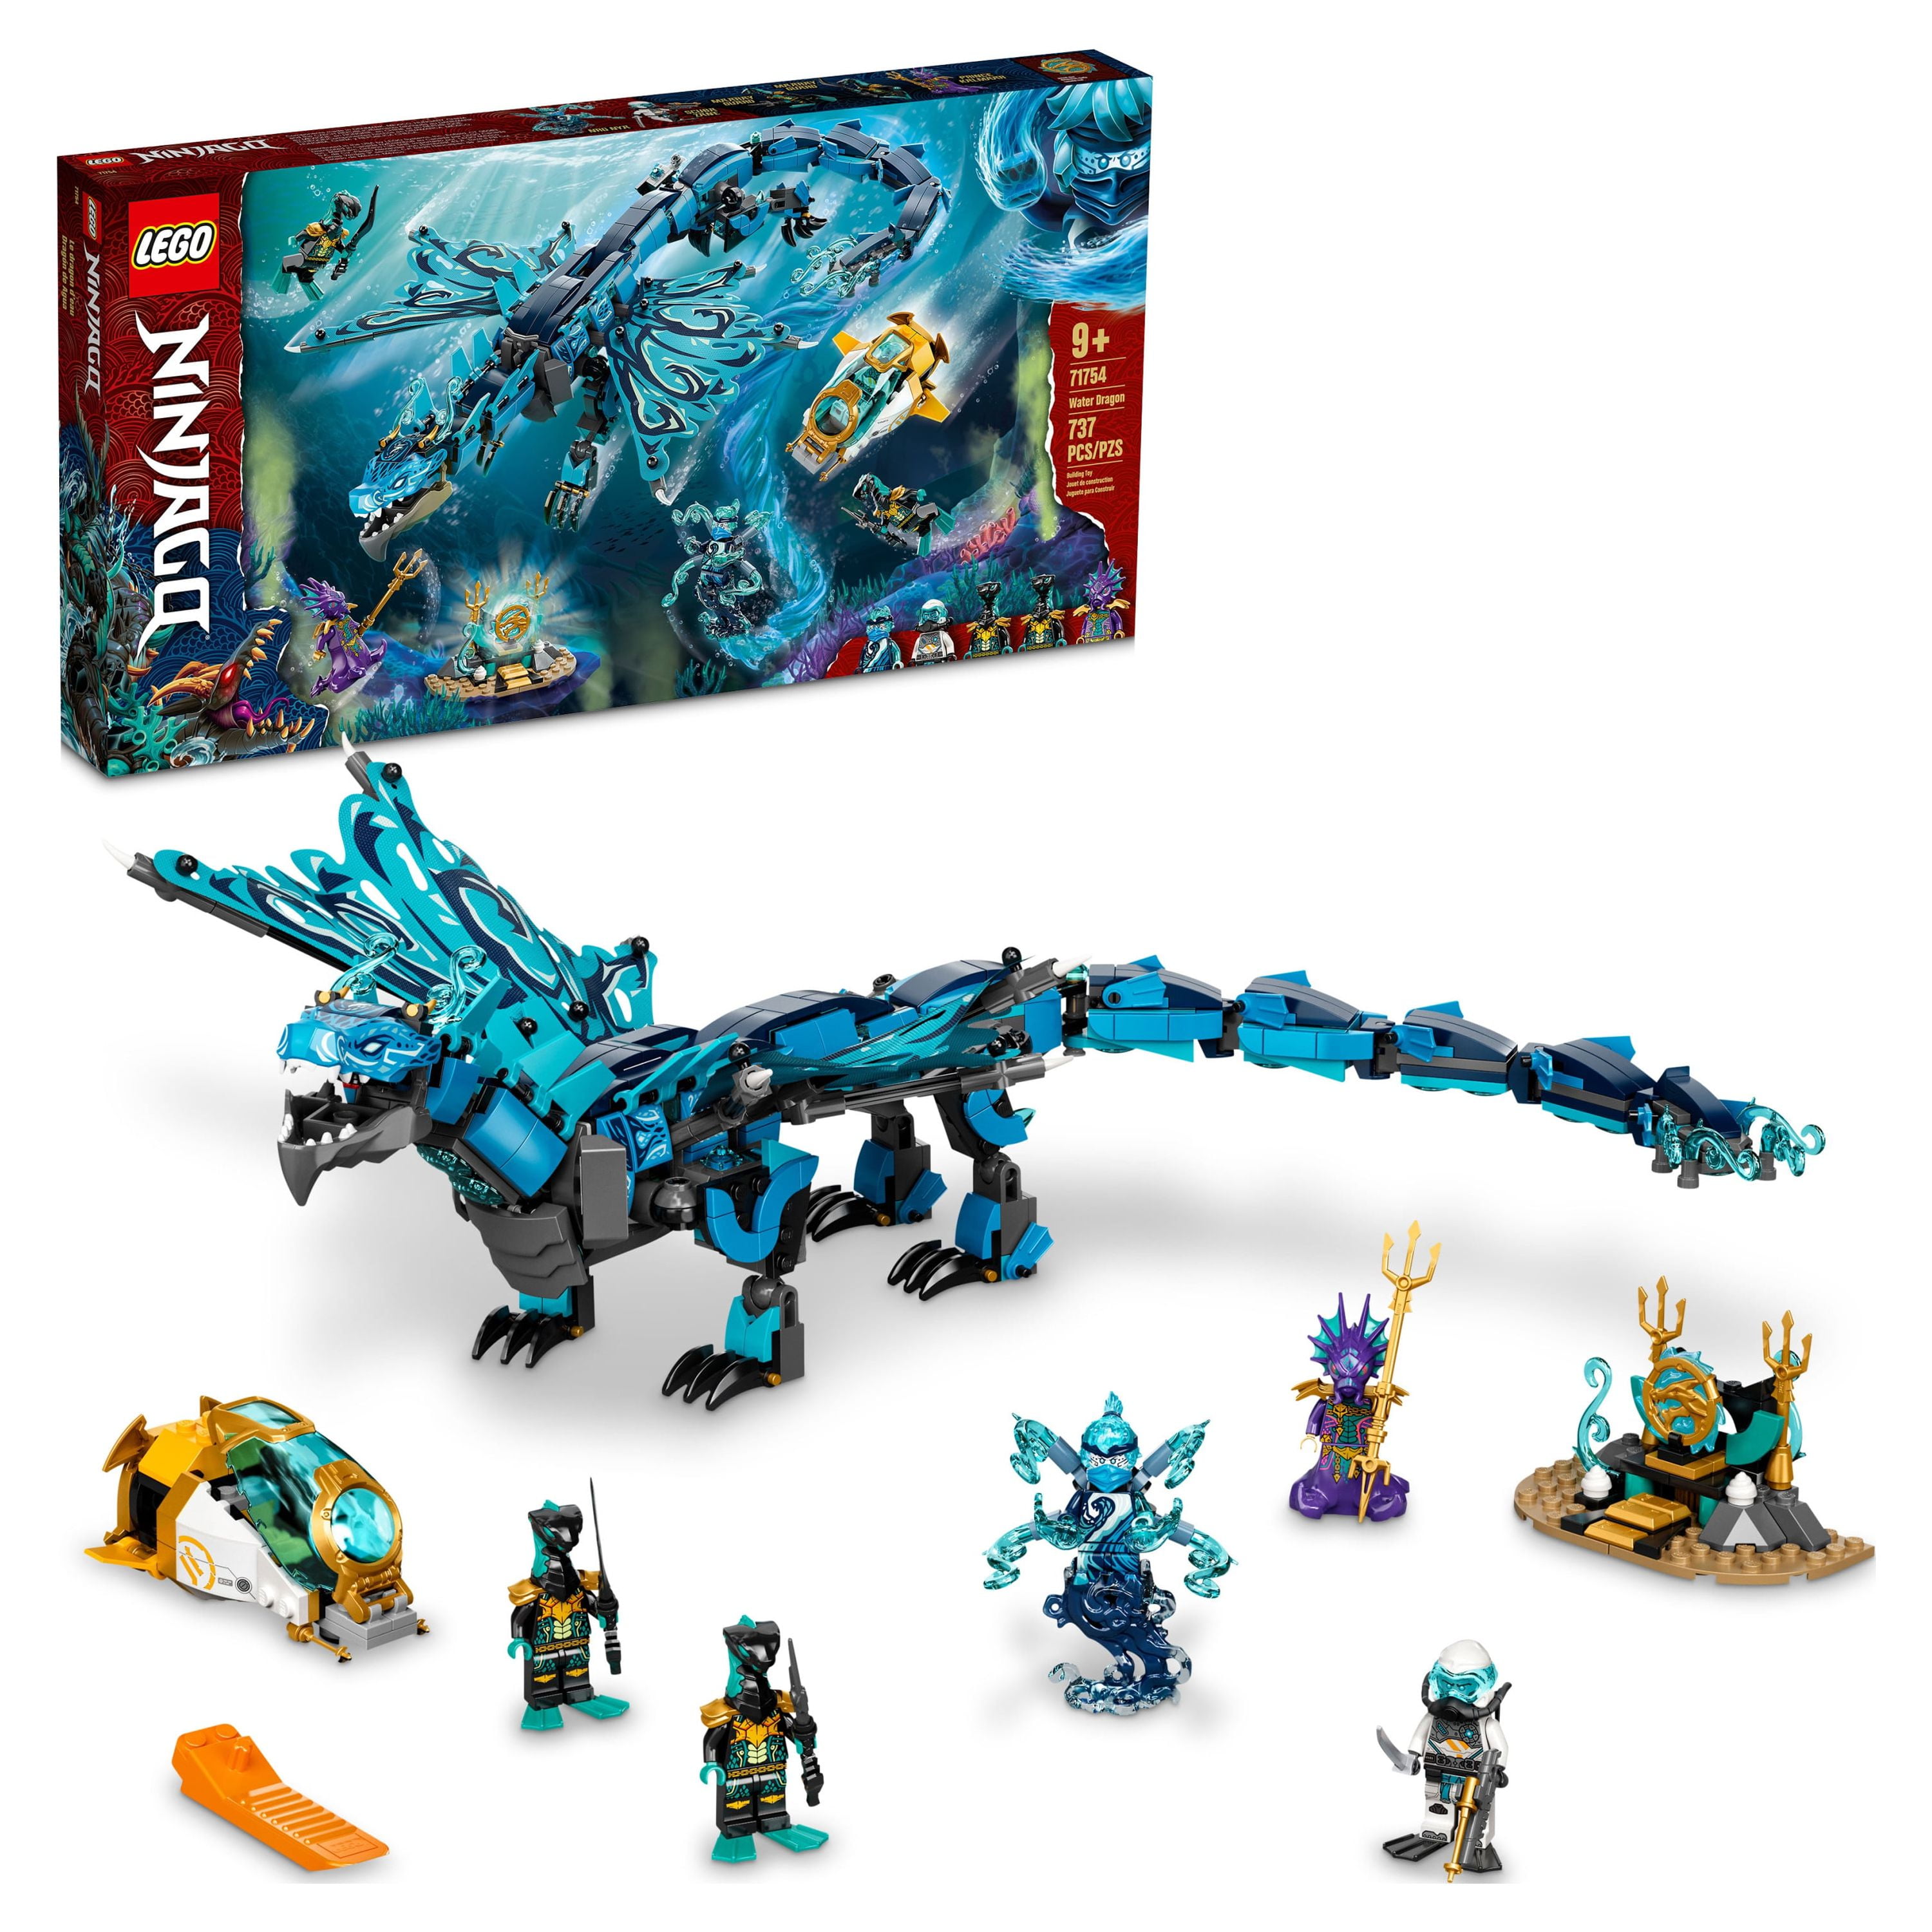 LEGO NINJAGO Imperium Dragon Hunter Hound 71790 Building Set Featuring  Monster and Dragon Toys and 3 Minifigures, Great Ninja Toys for Kids Ages  6+ Who Love to Play Out Ninja Stories 